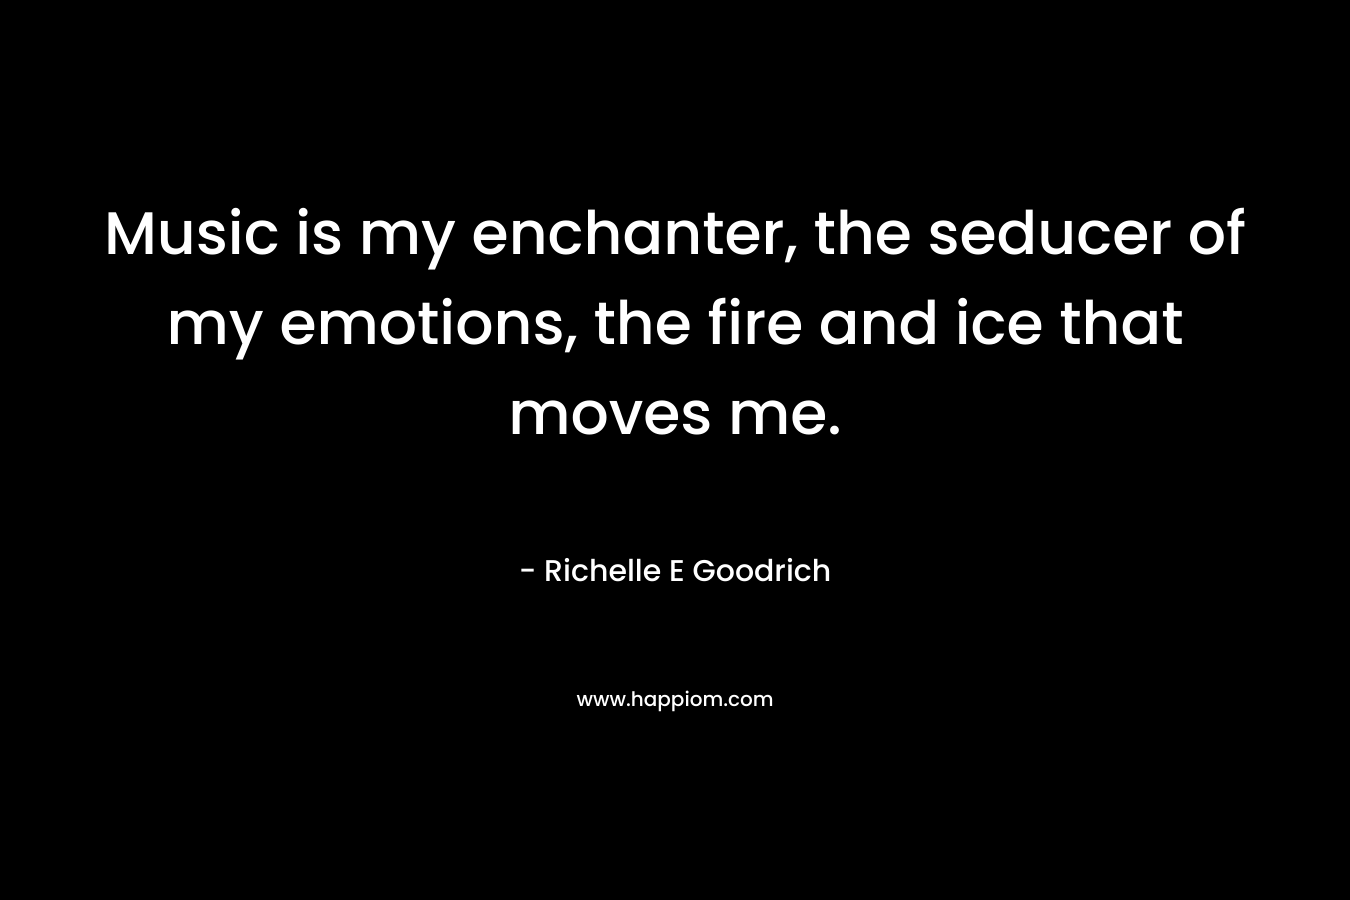 Music is my enchanter, the seducer of my emotions, the fire and ice that moves me. – Richelle E Goodrich